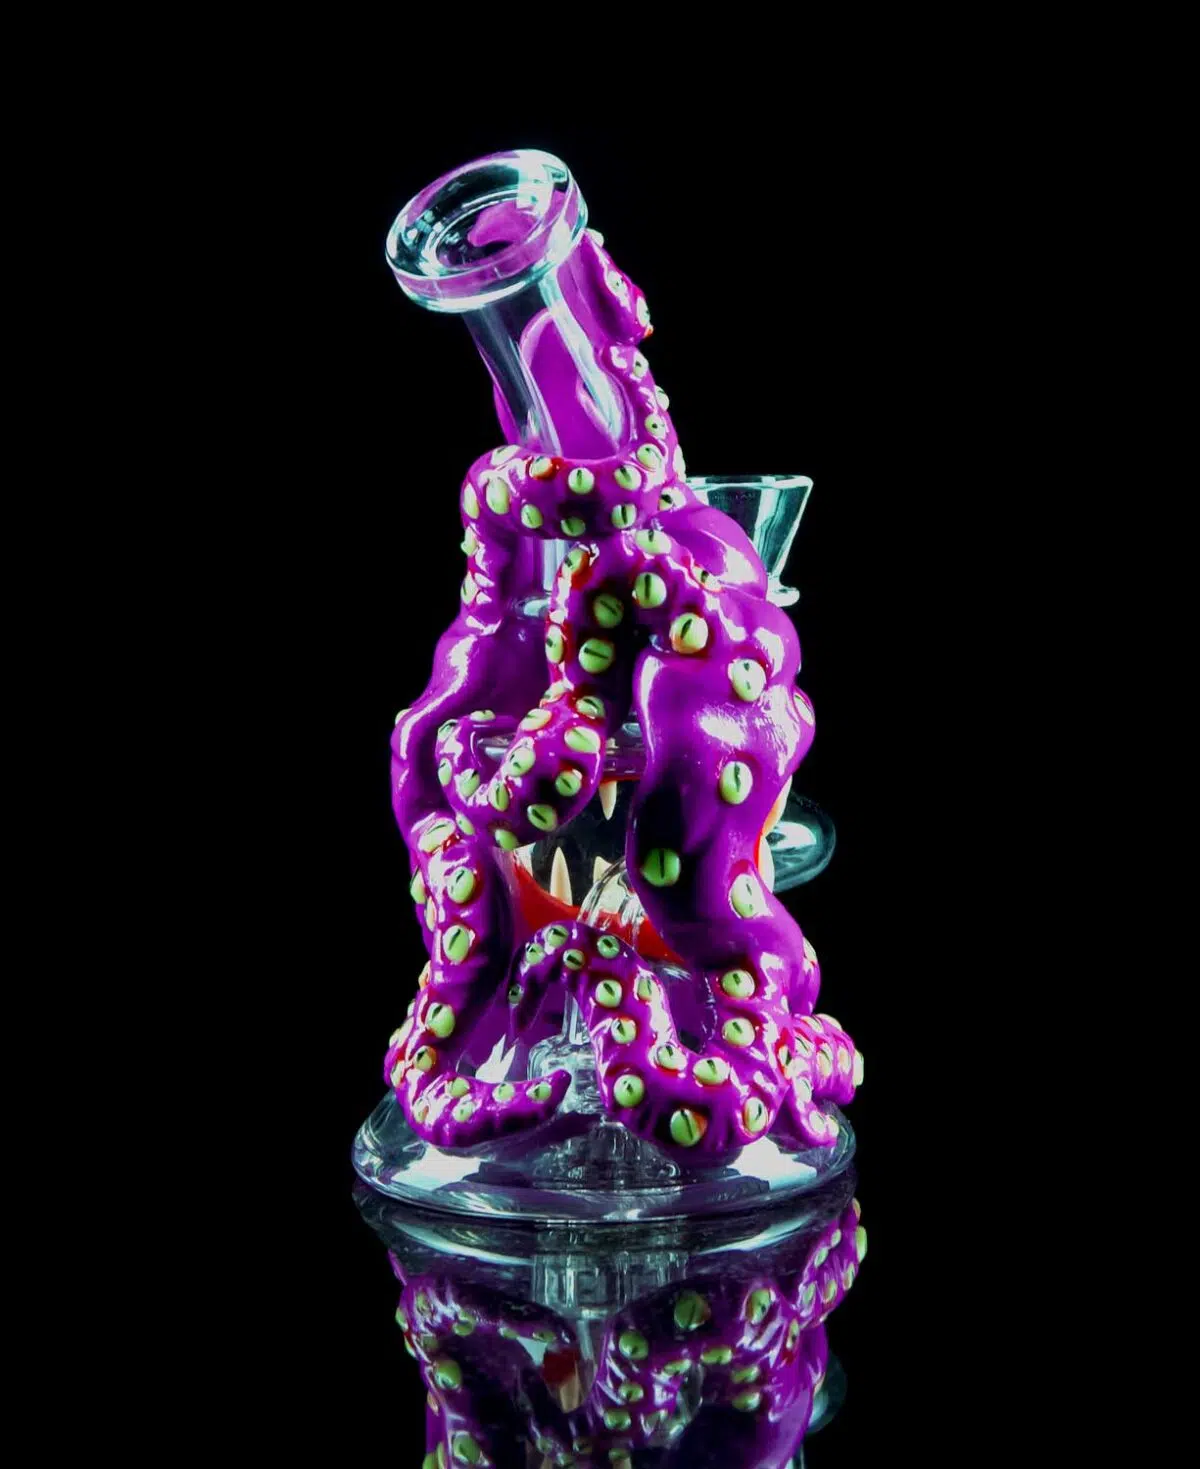 mini bong in the shape of an octopus monster